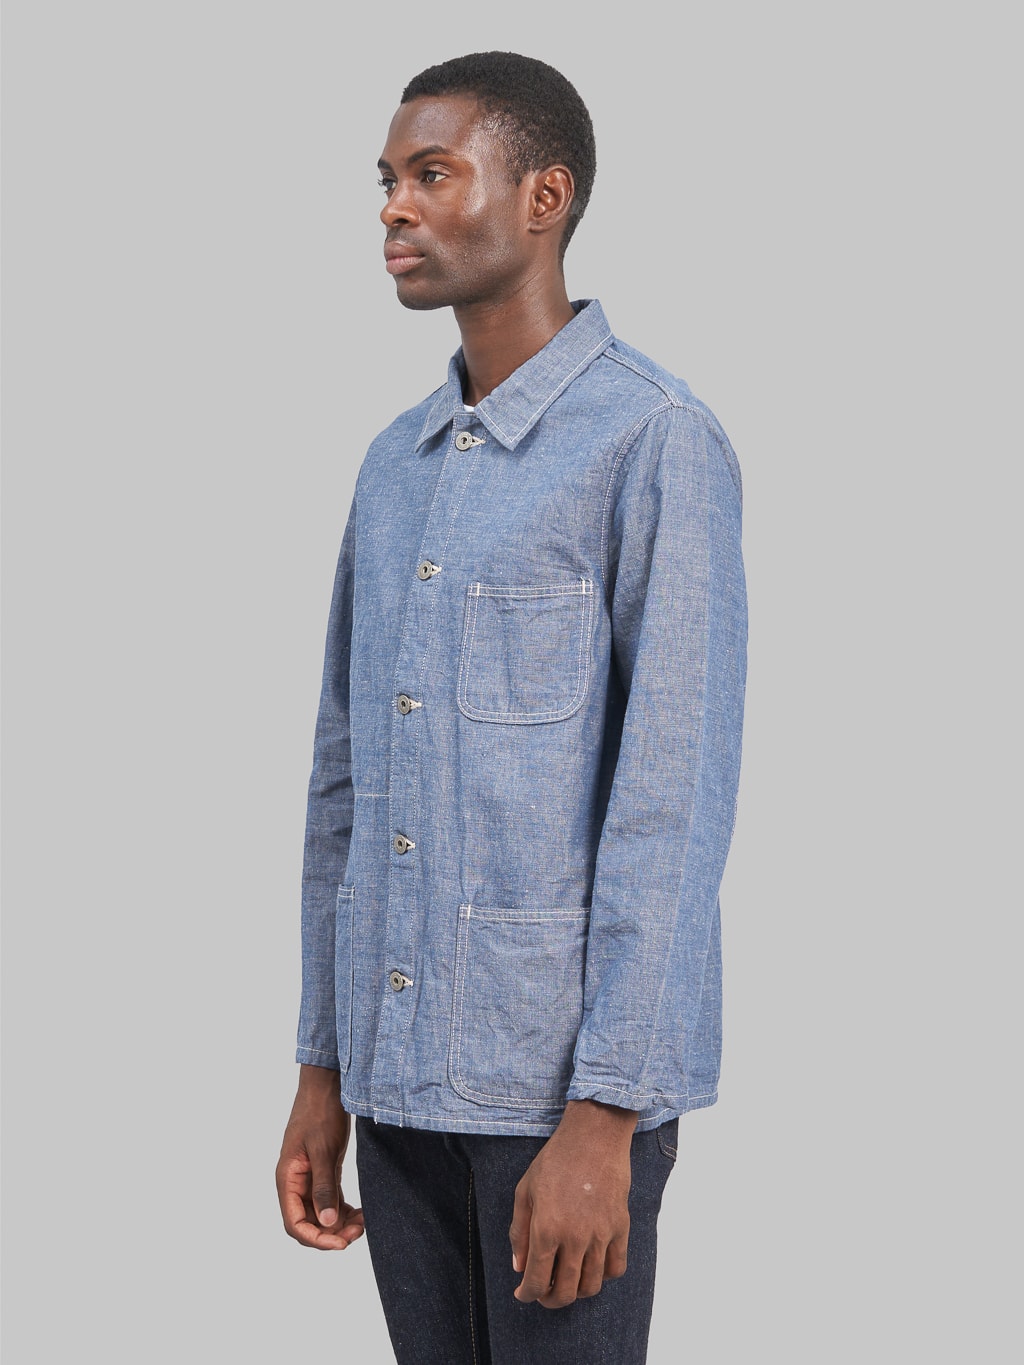 Oni denim heavy chambray blue gray coverall model side fit